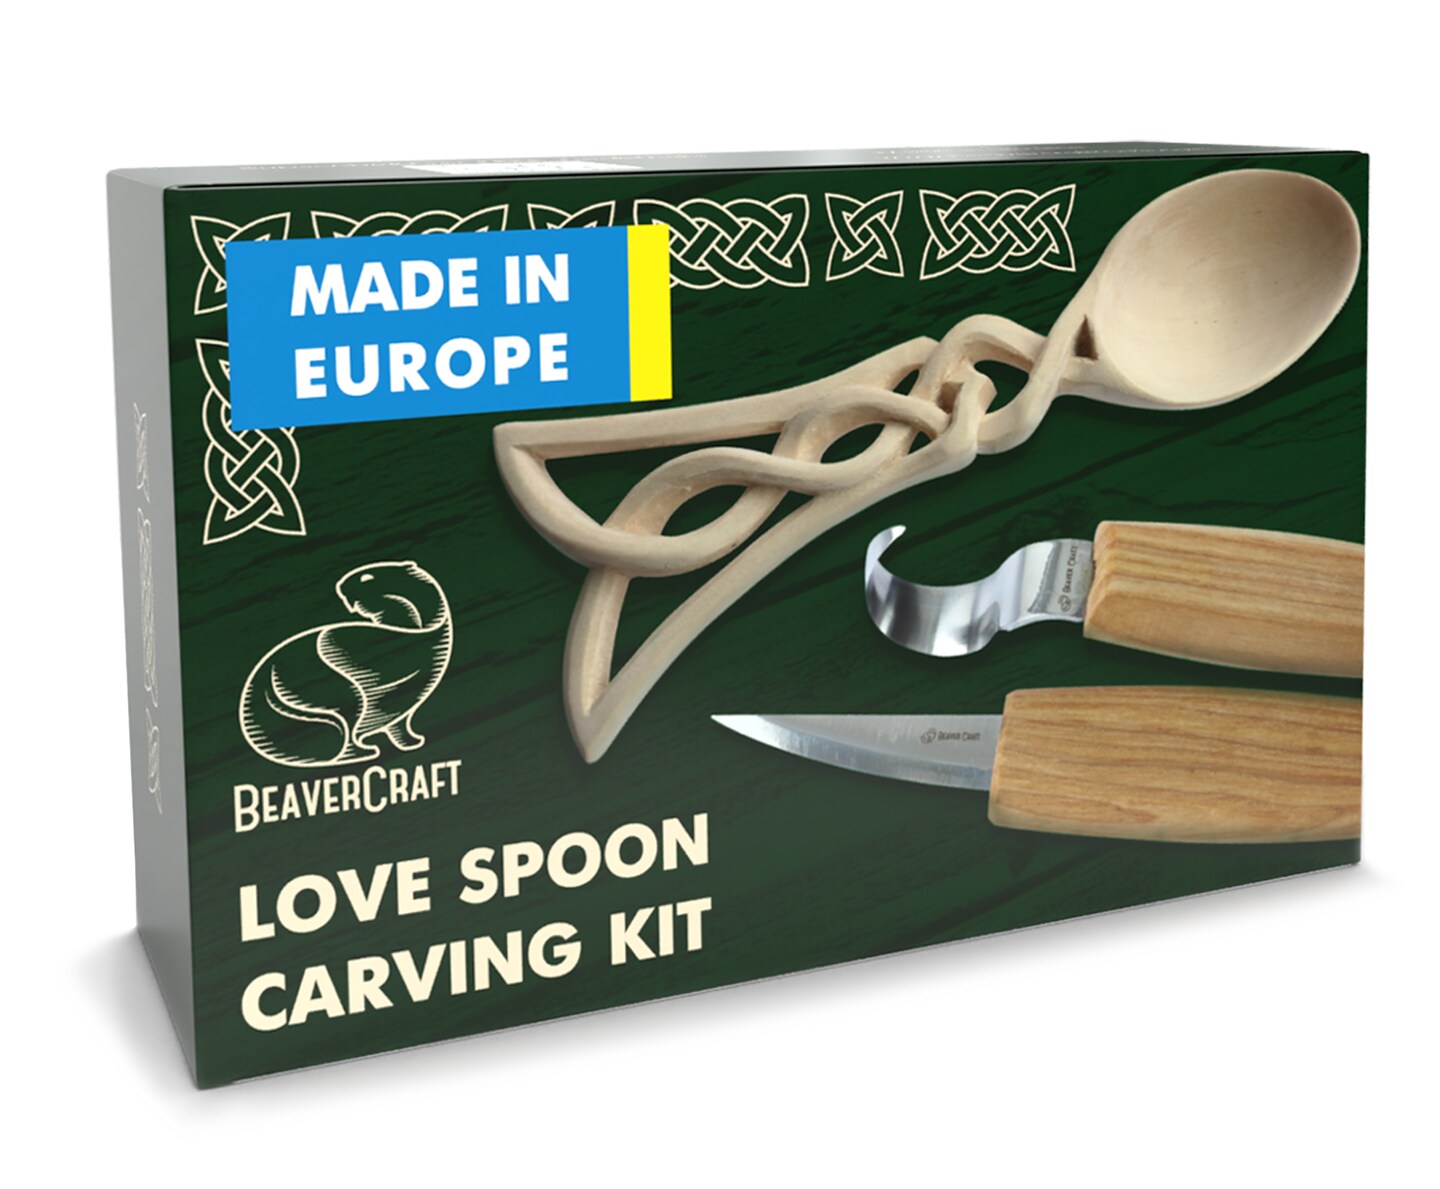 BeaverCraft, Wood Whittling Kit for Beginners DIY04 - Spoon Carving Kit - Wood Carving Whittling Hobby Kit for Adults and Teens - Wood Carving Hook Knife - Woodworking Tools - Spoon Carving Tools